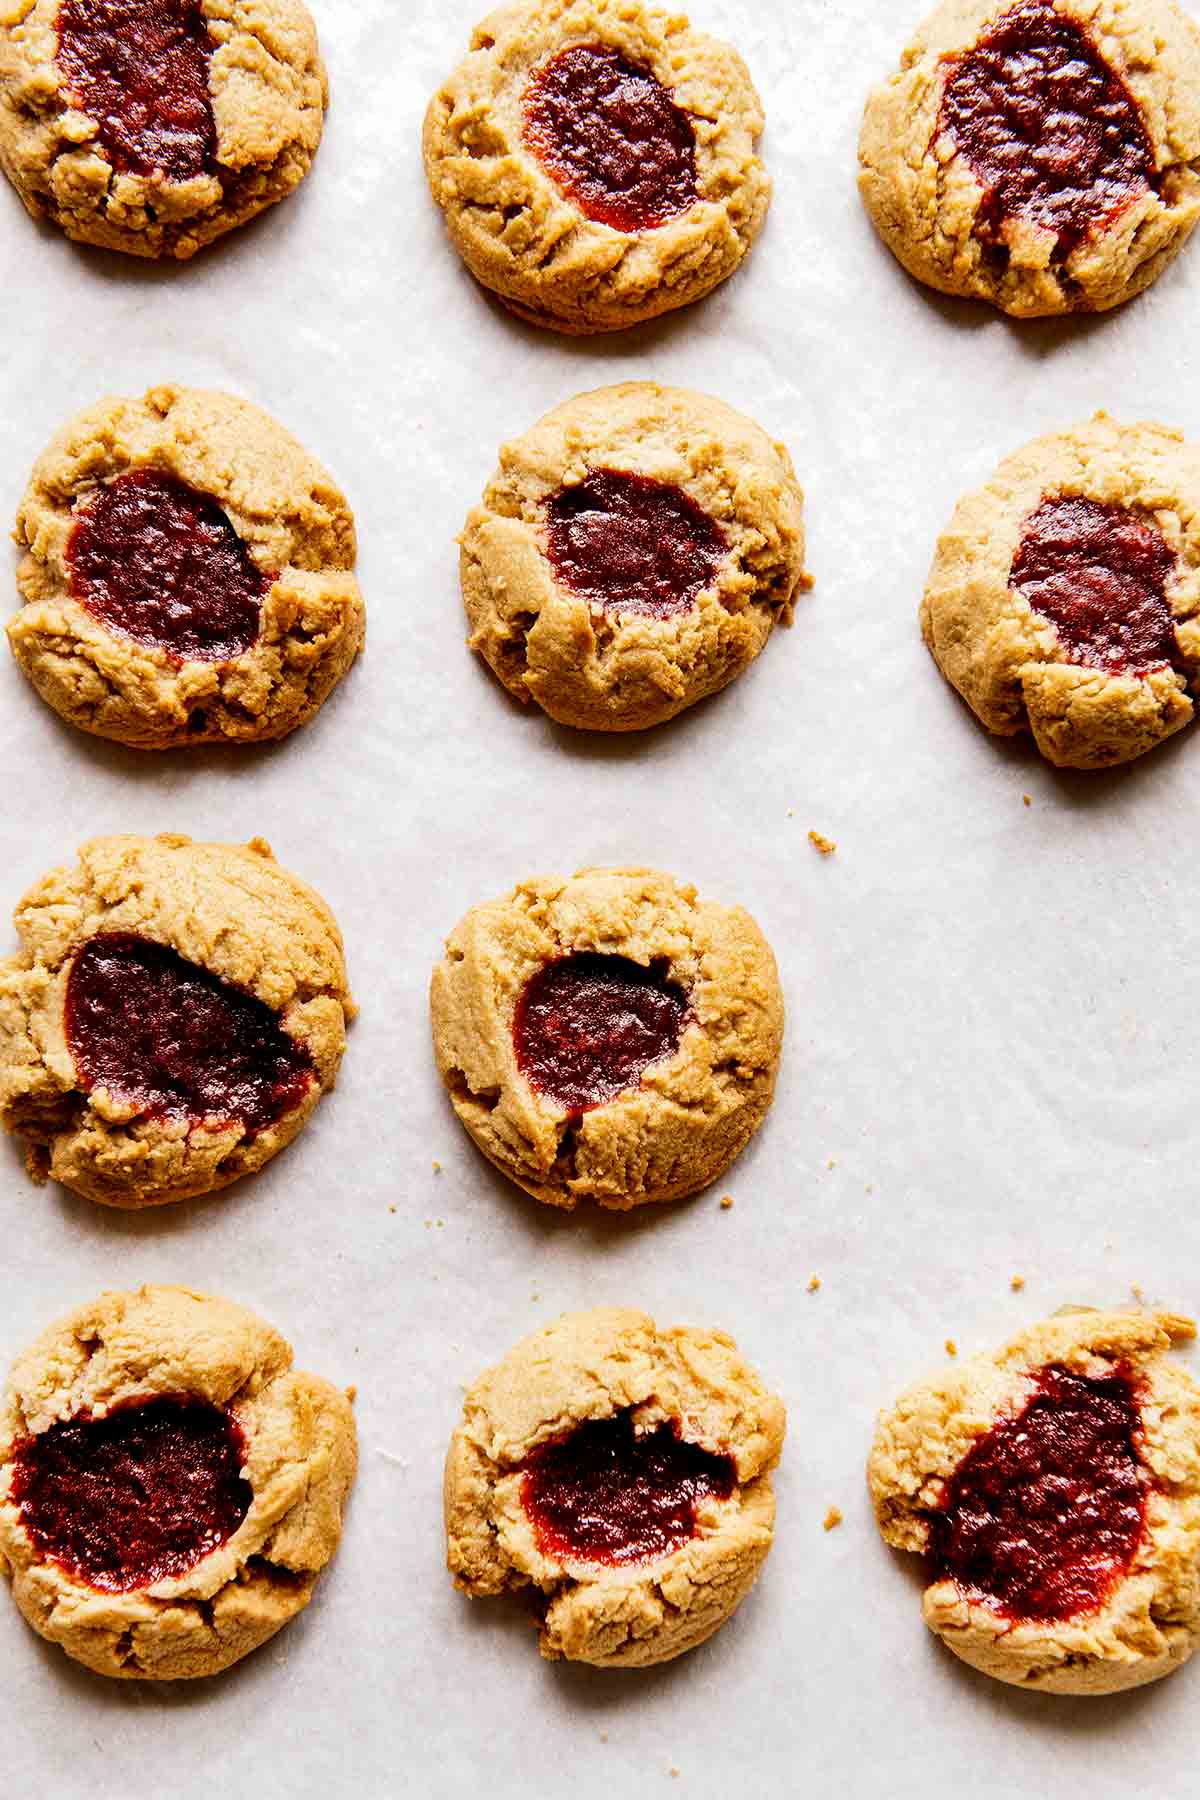 Eleven barley thumbprint cookies on parchment